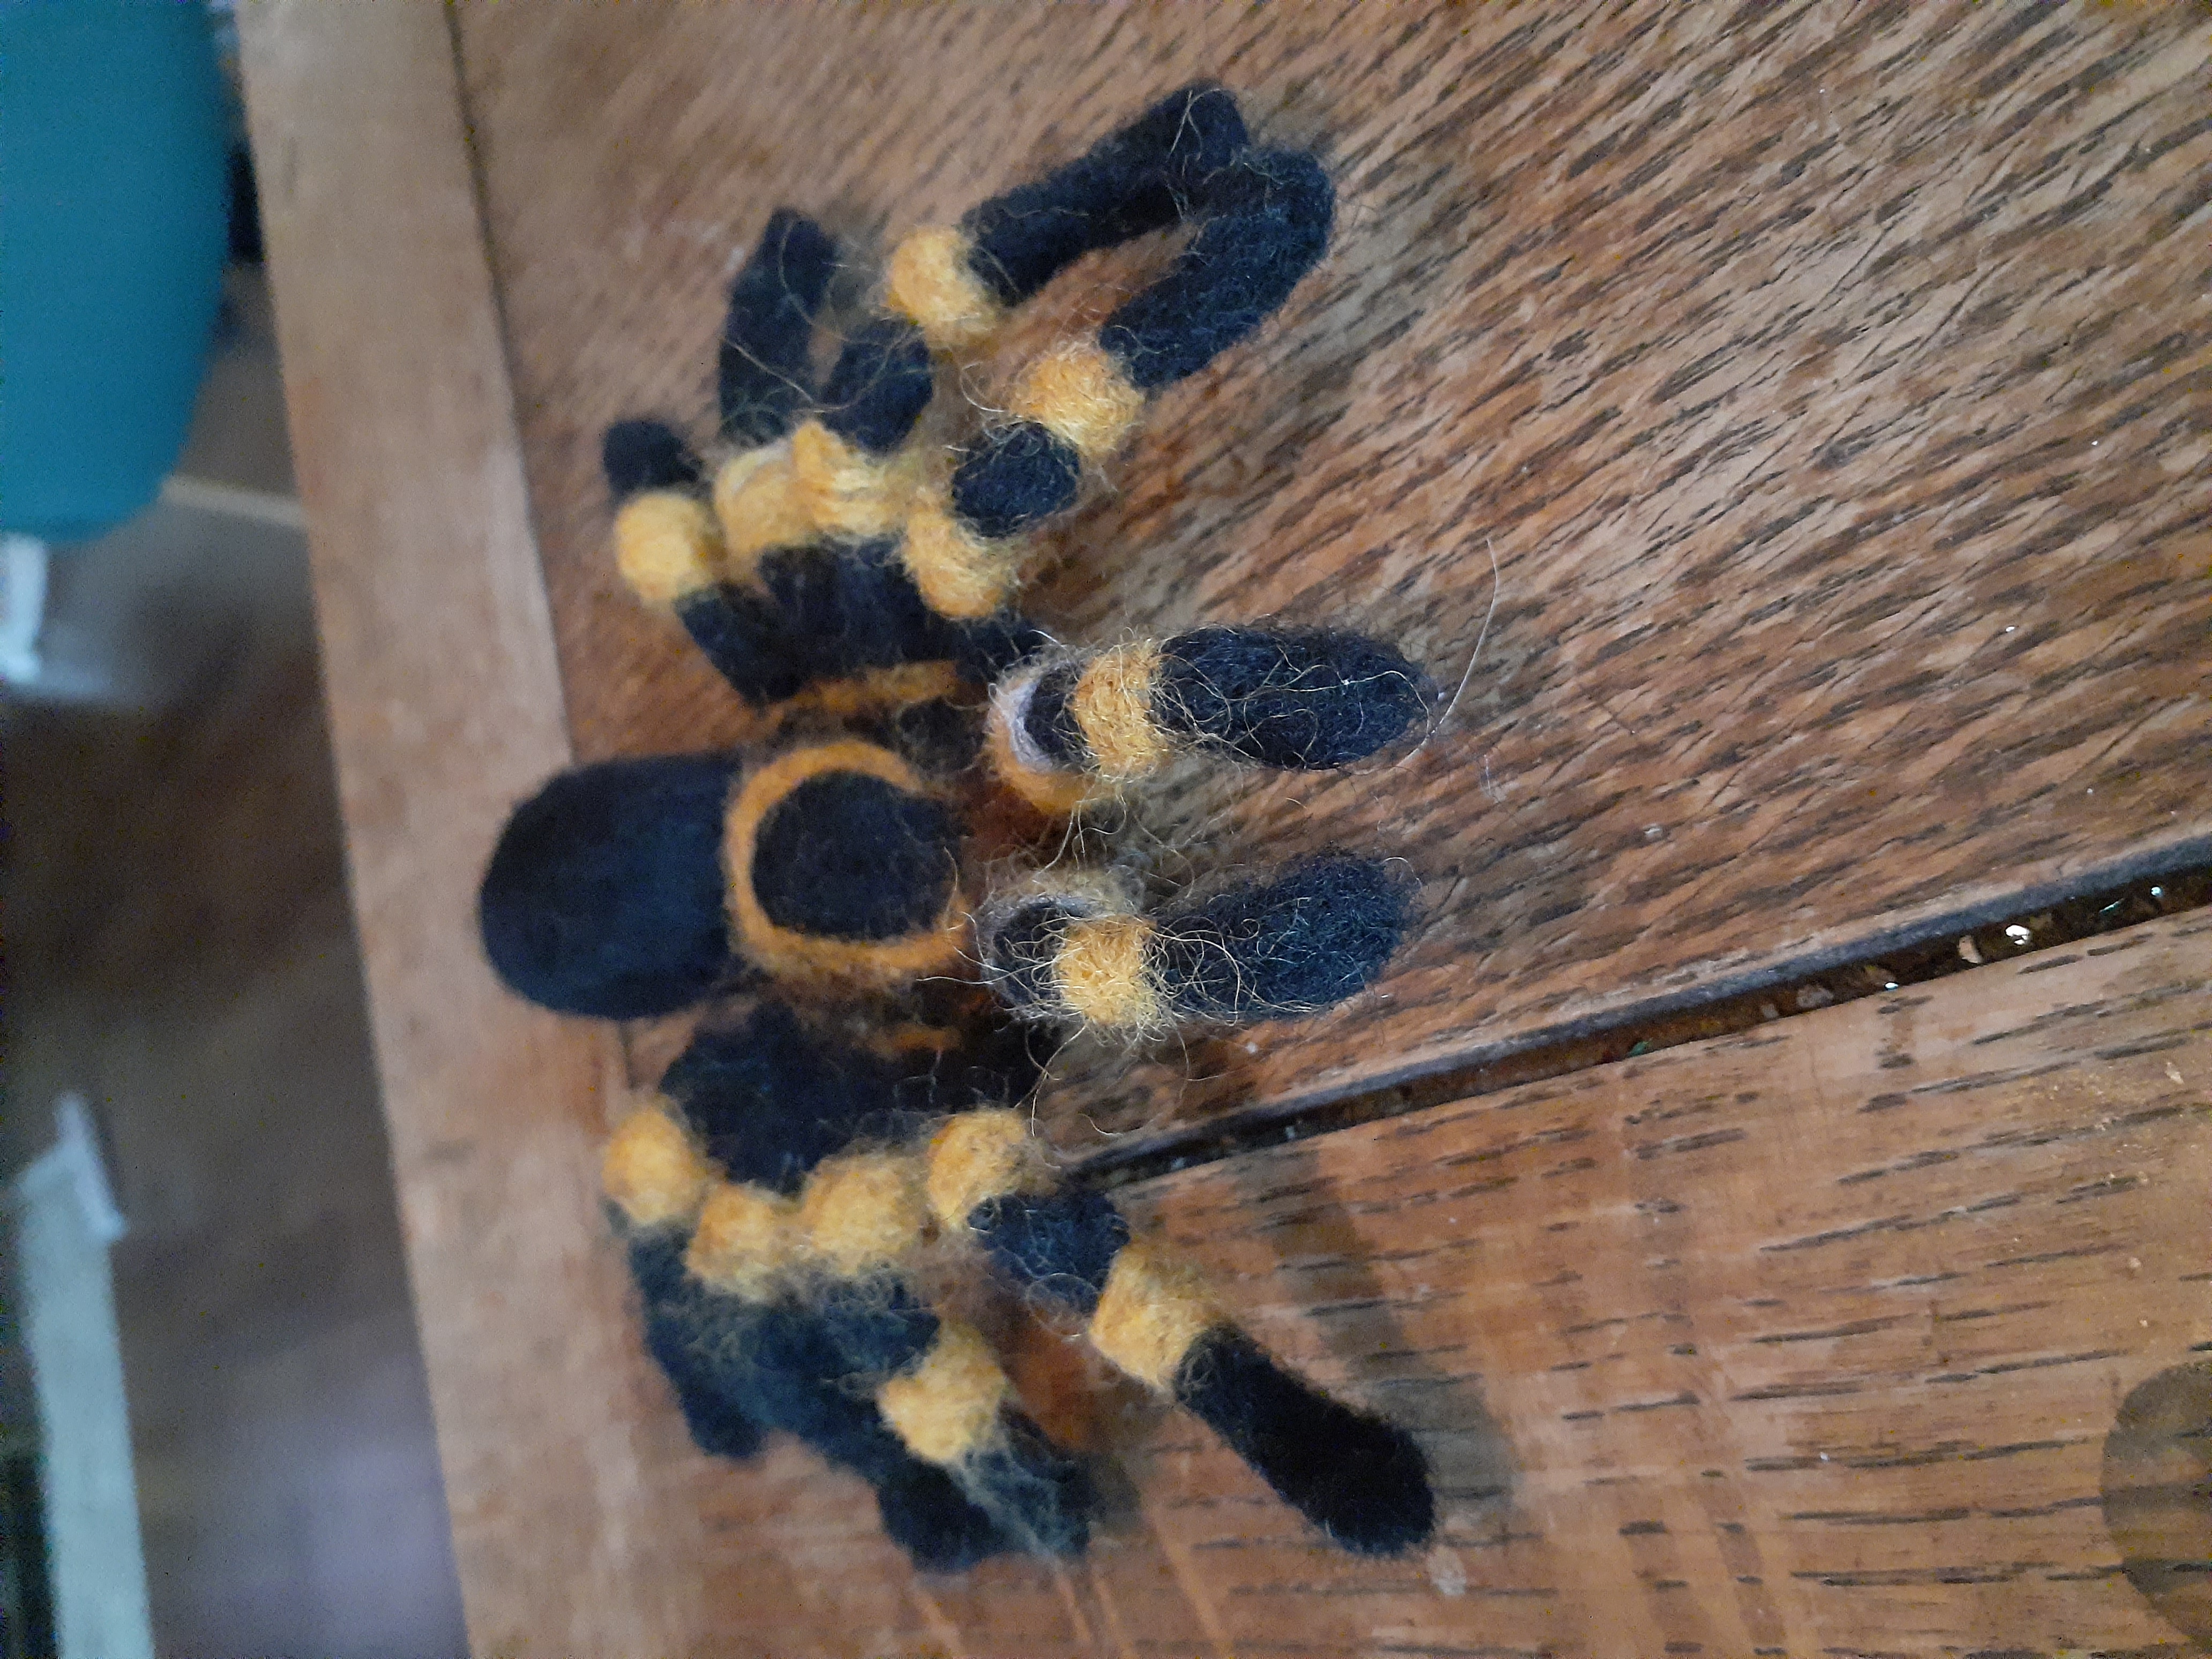 A felted tarantula that is black with orange stripes on its legs.